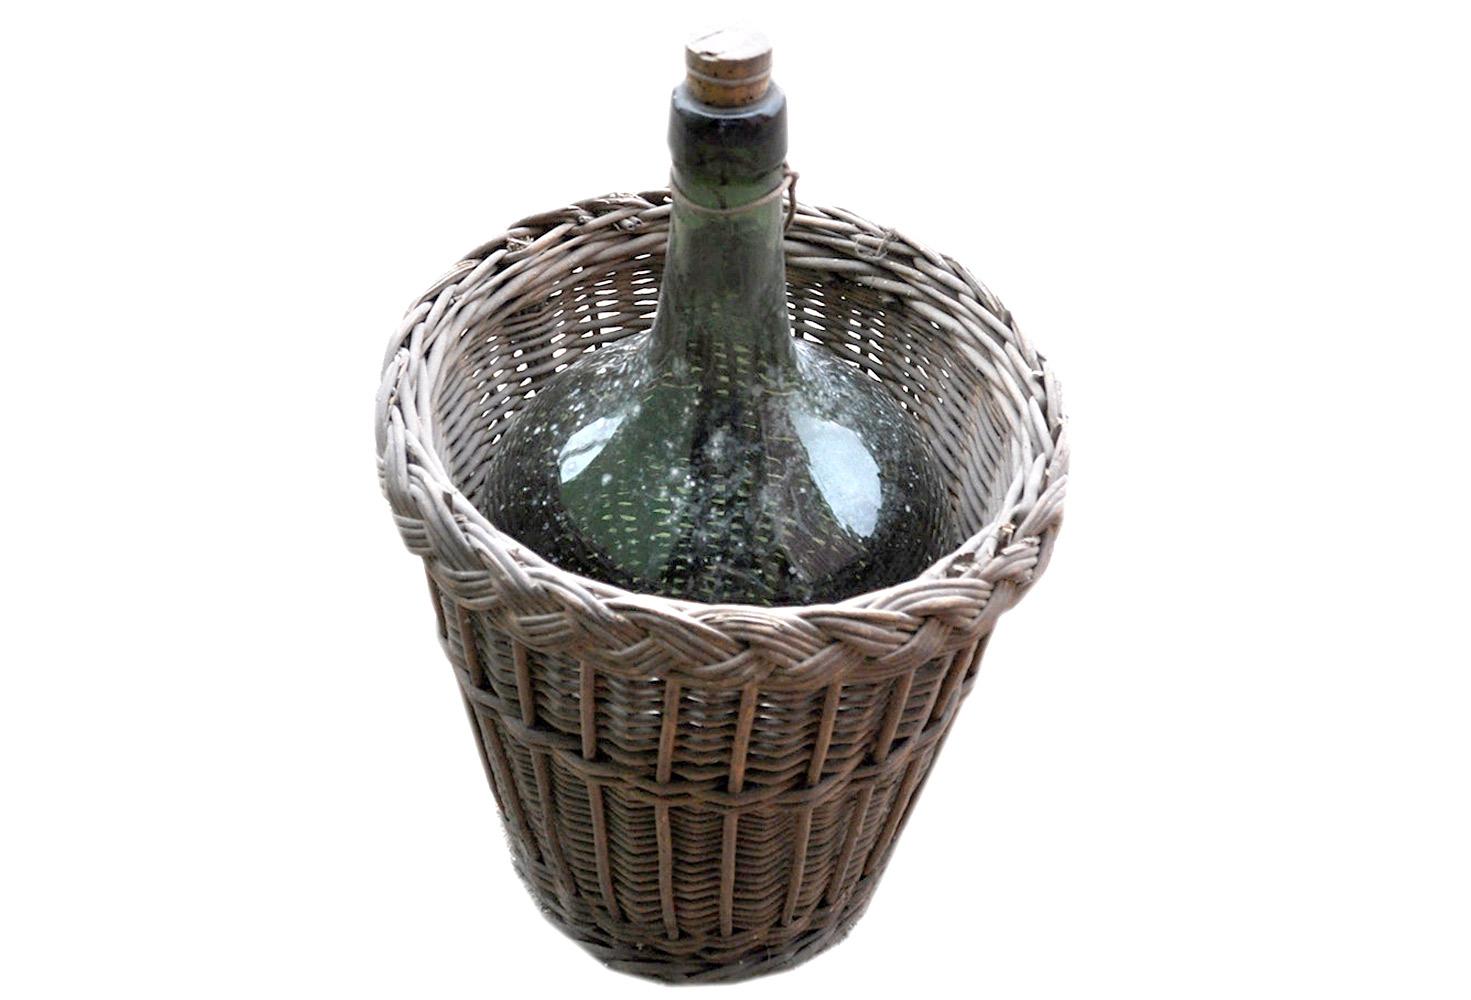 A vintage wine bottle and carrier found in Hungary. Basket and bottle is original, found as is. This truly is a wonderful find and has had lots of use - a treasure with memories.